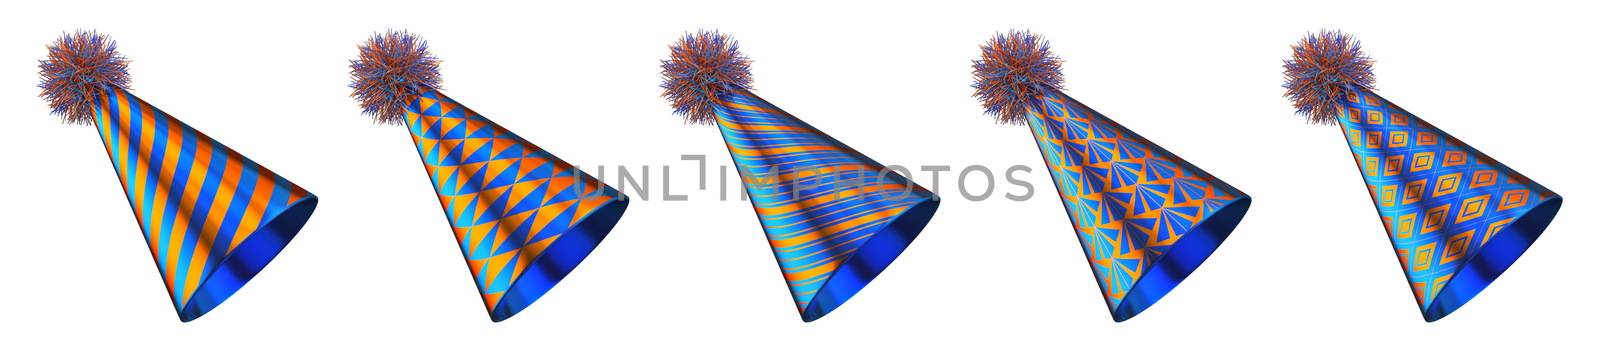 Five blue orange party hats 3D render illustration isolated on white background